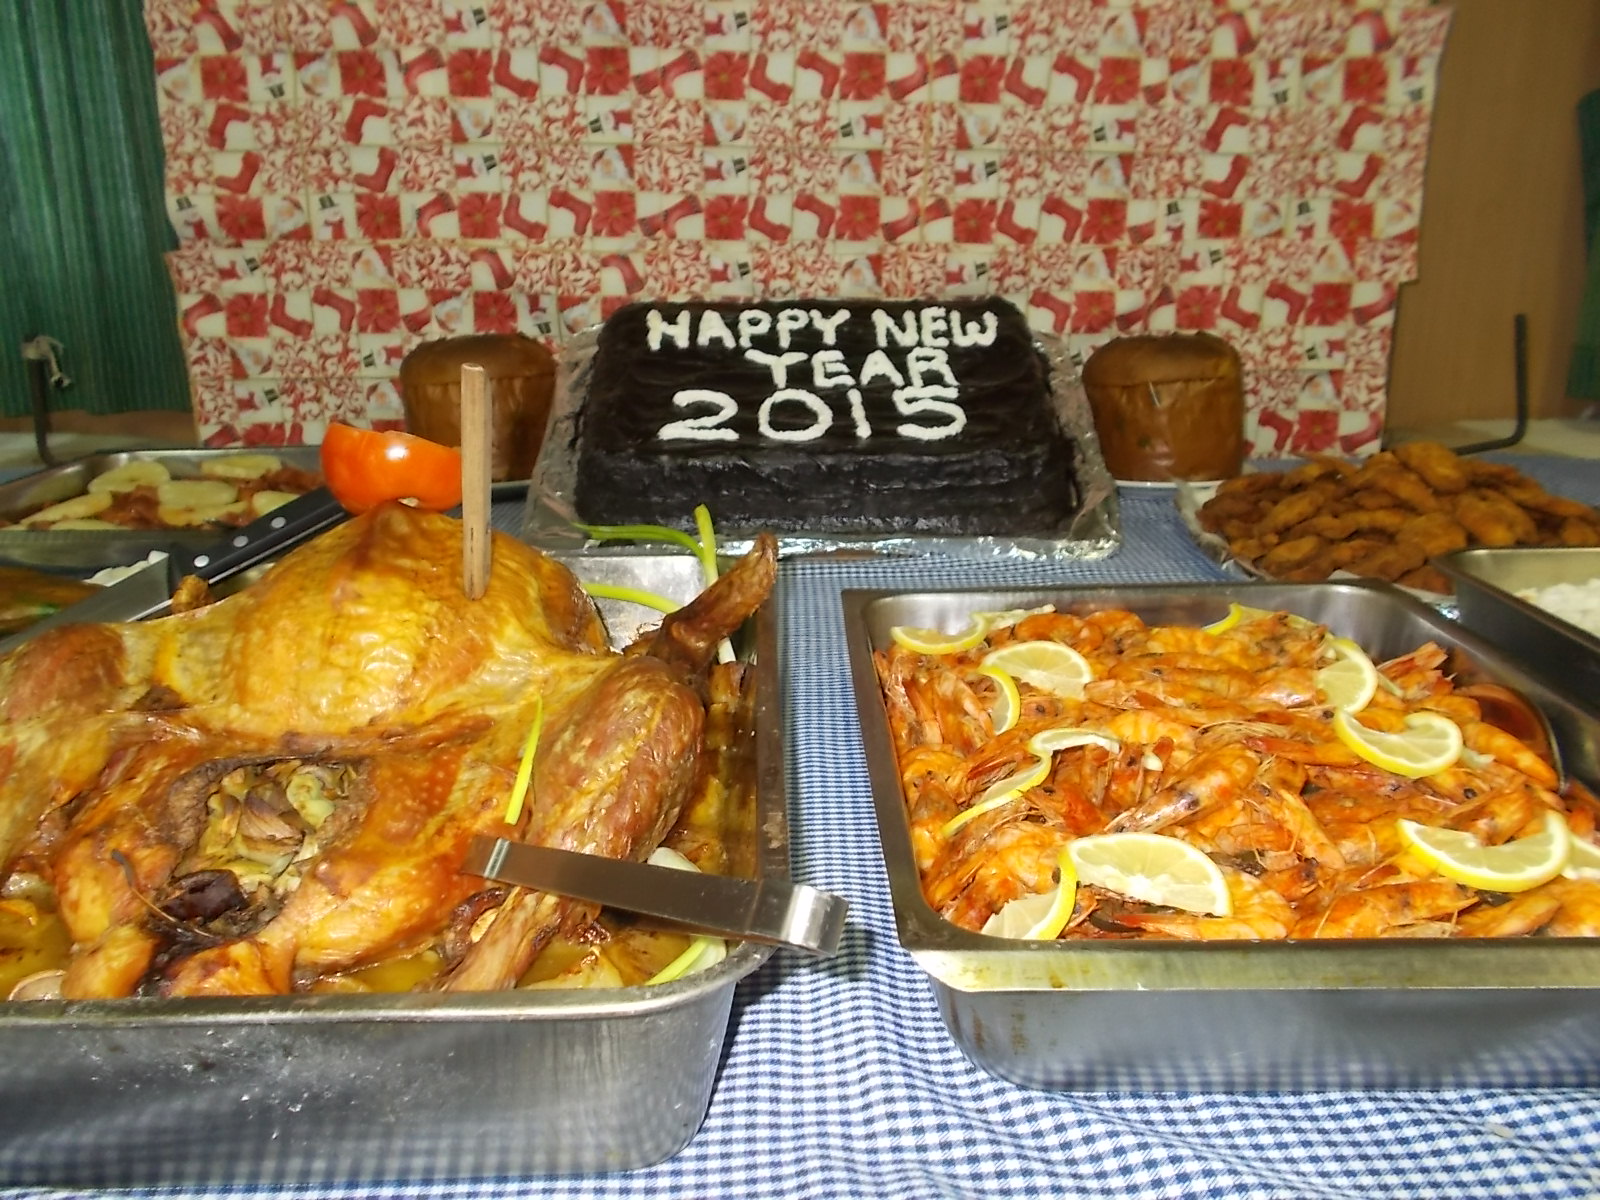 A chocolate cake written with "Happy New Year 2015" and other food served on the table inside the messroom.